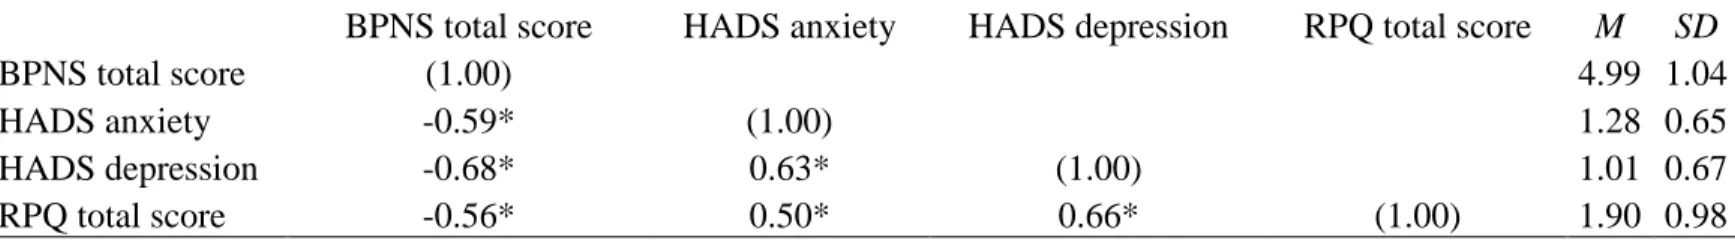 Table 4. Correlations between BPNS total score, RPQ total score and HADS anxiety and depression subscale  scores